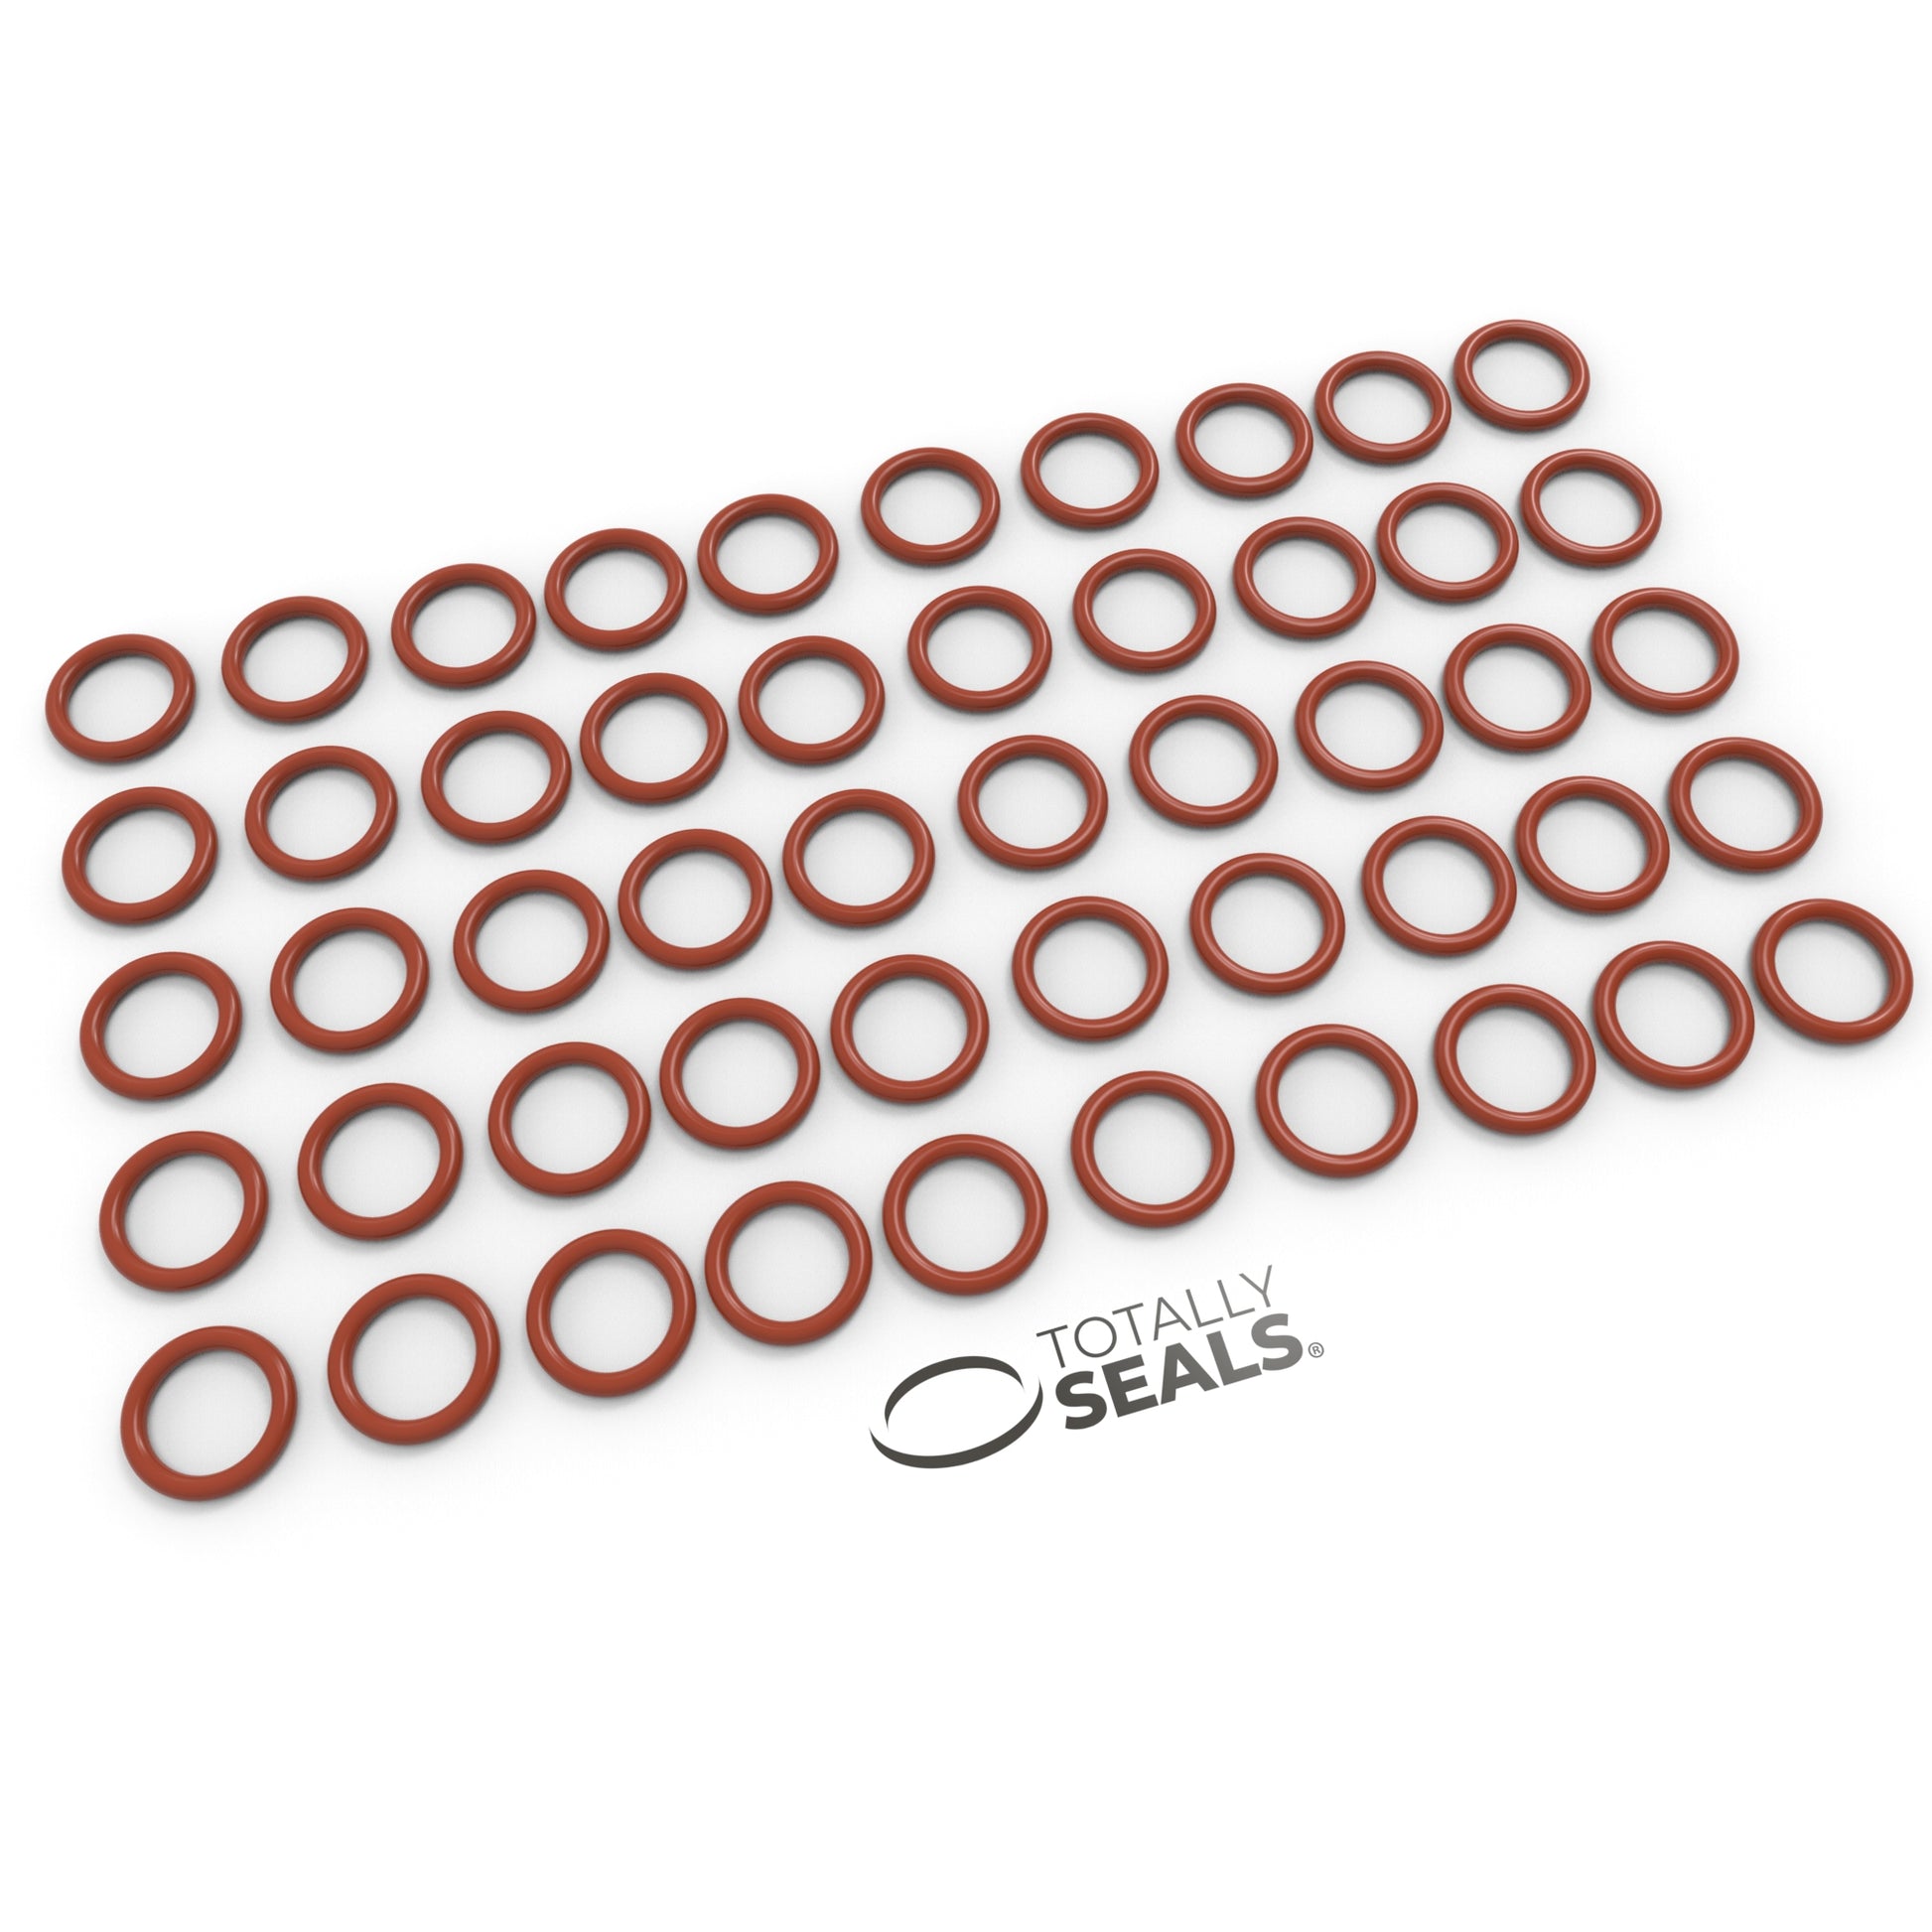 15mm x 2.5mm (20mm OD) Silicone O-Rings - Totally Seals®